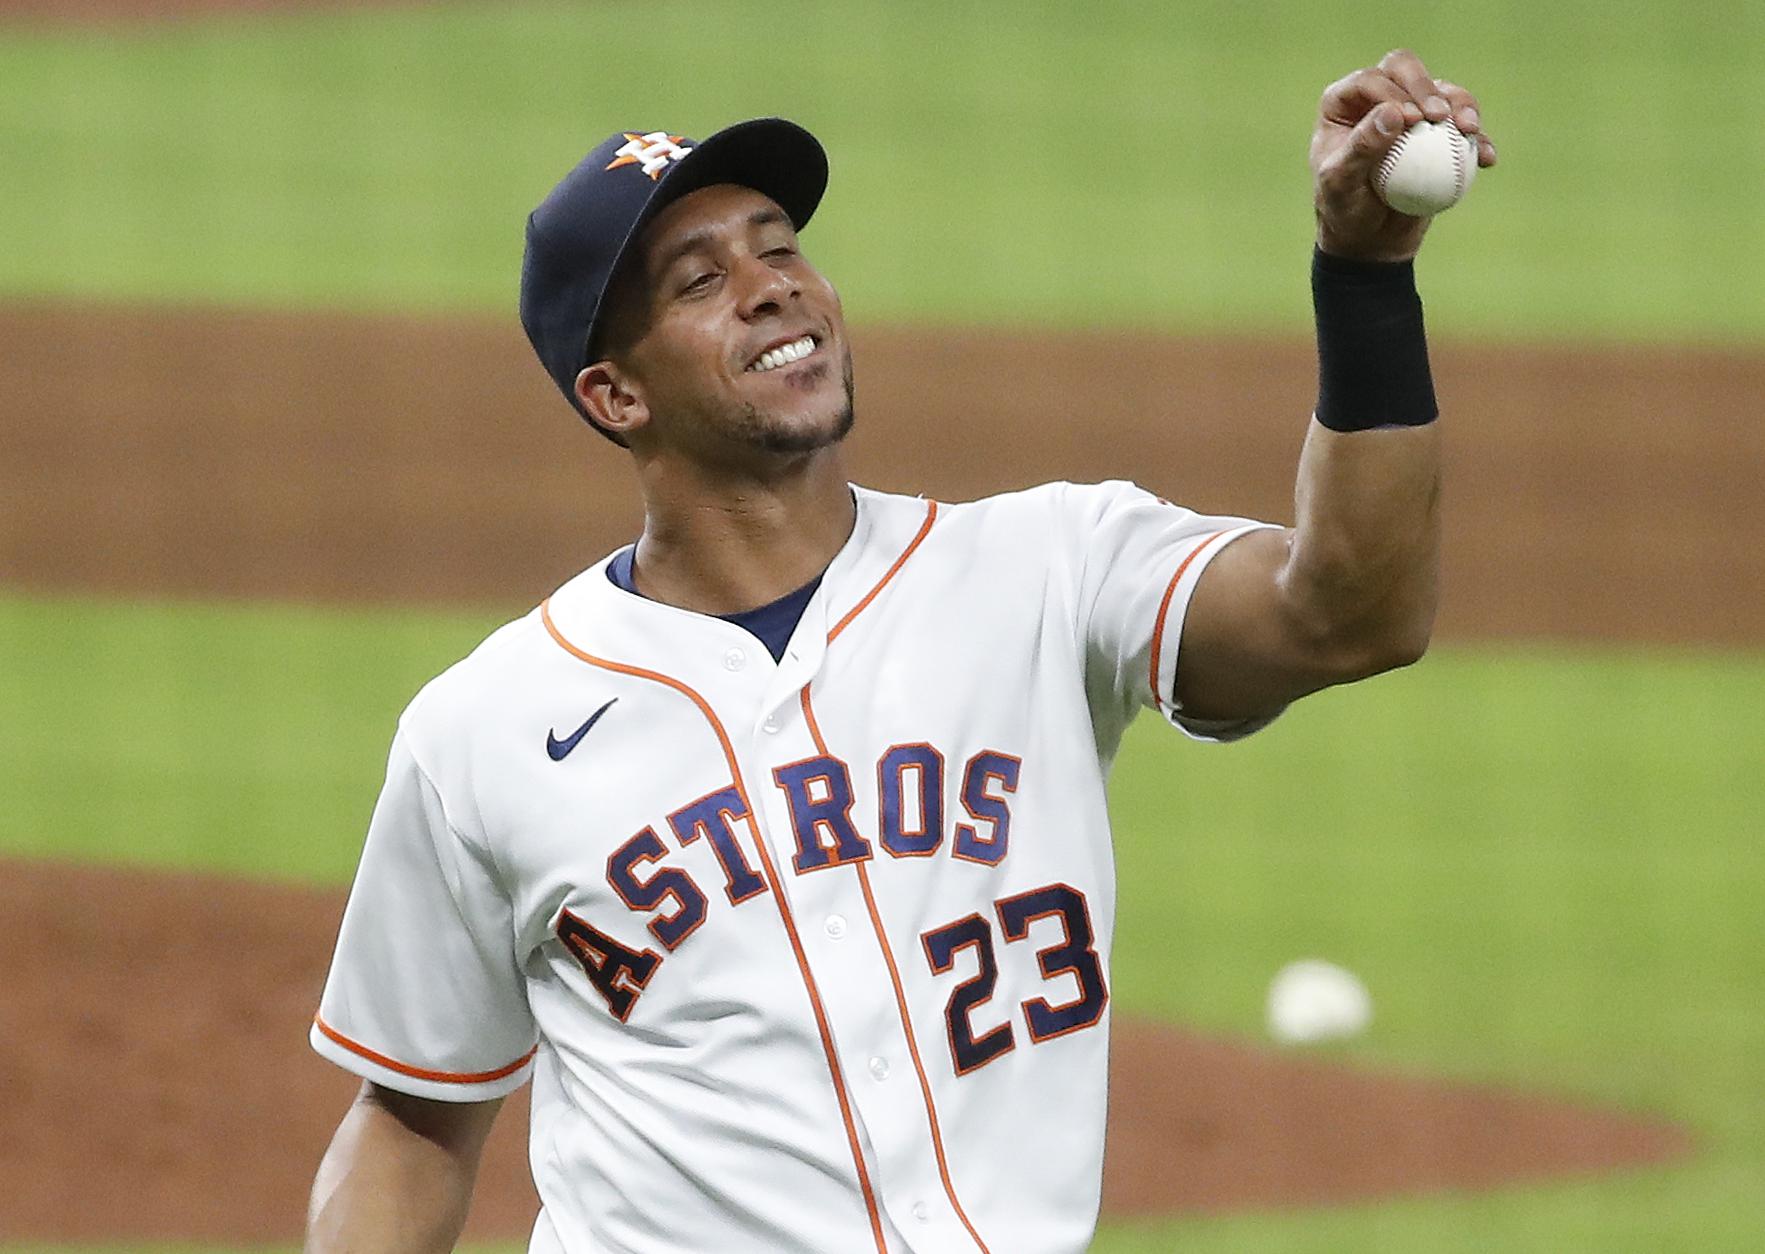 Michael Brantley happy to be back in Astros’ outfield